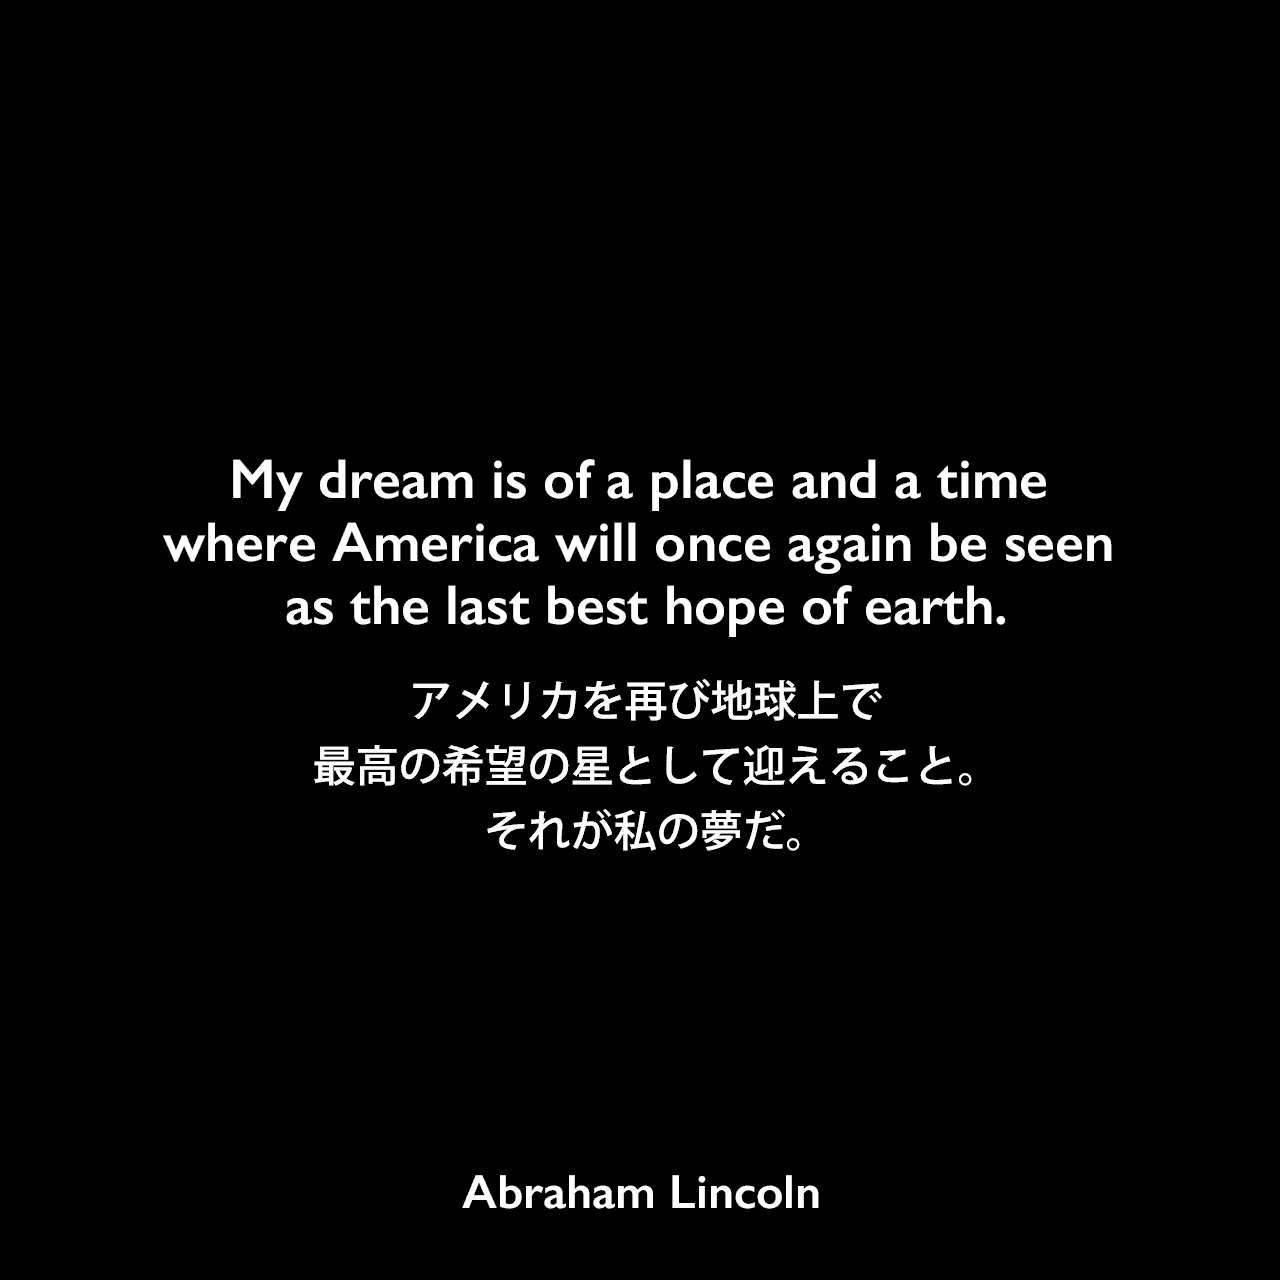 My dream is of a place and a time where America will once again be seen as the last best hope of earth.アメリカを再び地球上で最高の希望の星として迎えること。それが私の夢だ。Abraham Lincoln